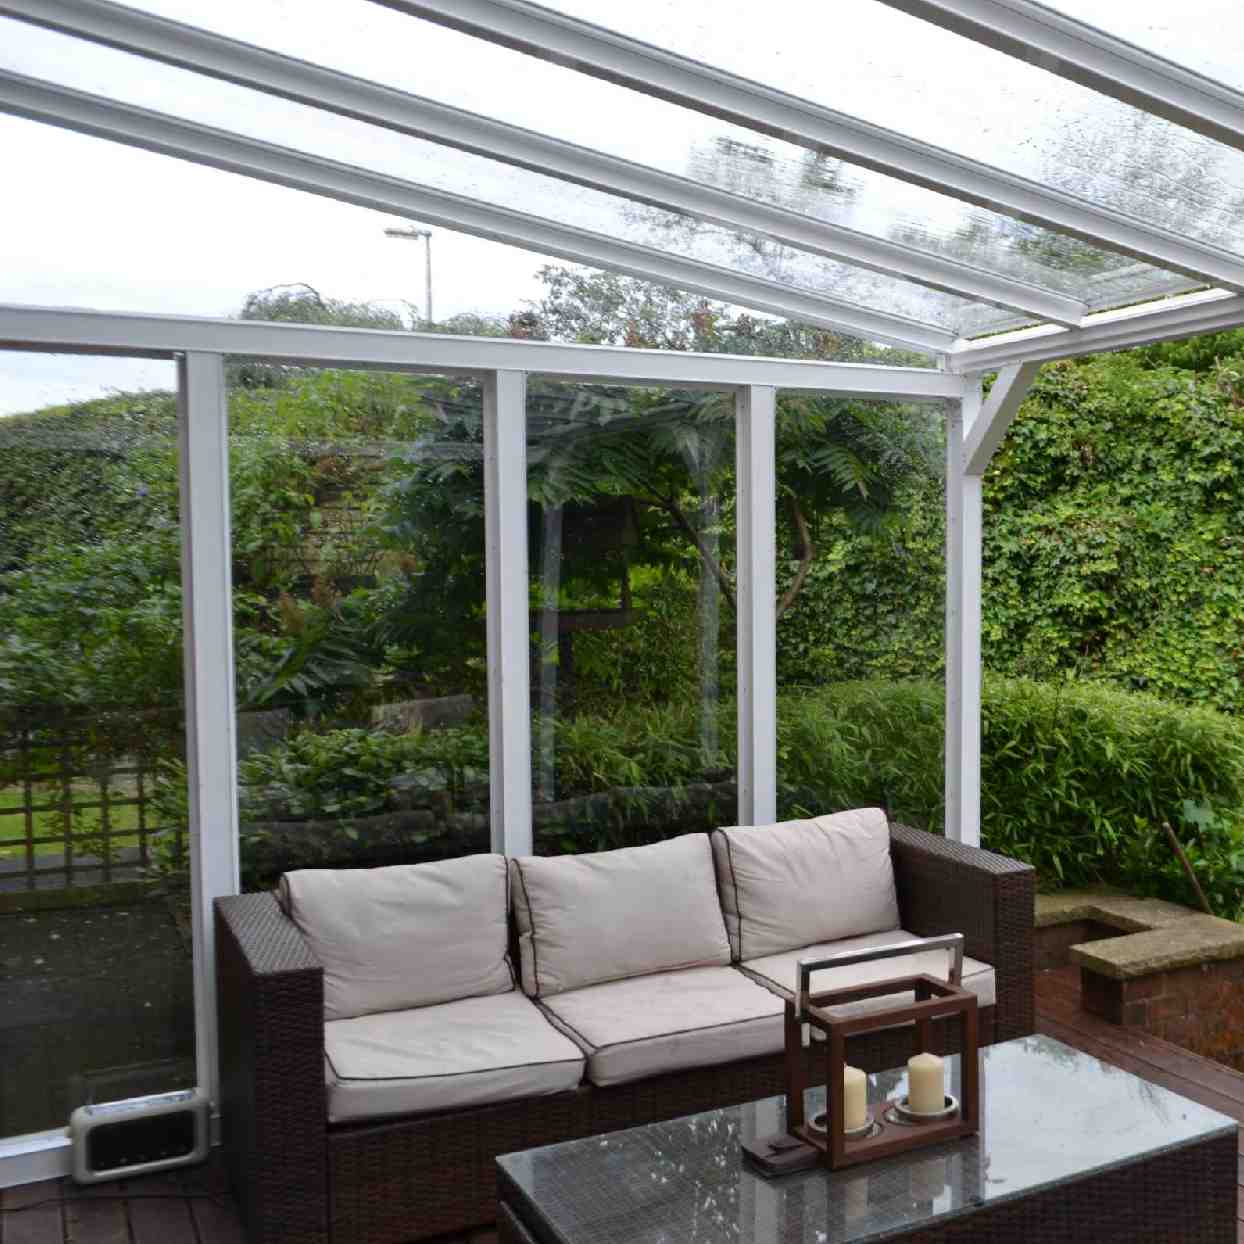 Buy Omega Verandah White with 6mm Glass Clear Plate Polycarbonate Glazing - 9.8m (W) x 3.5m (P), (5) Supporting Posts online today